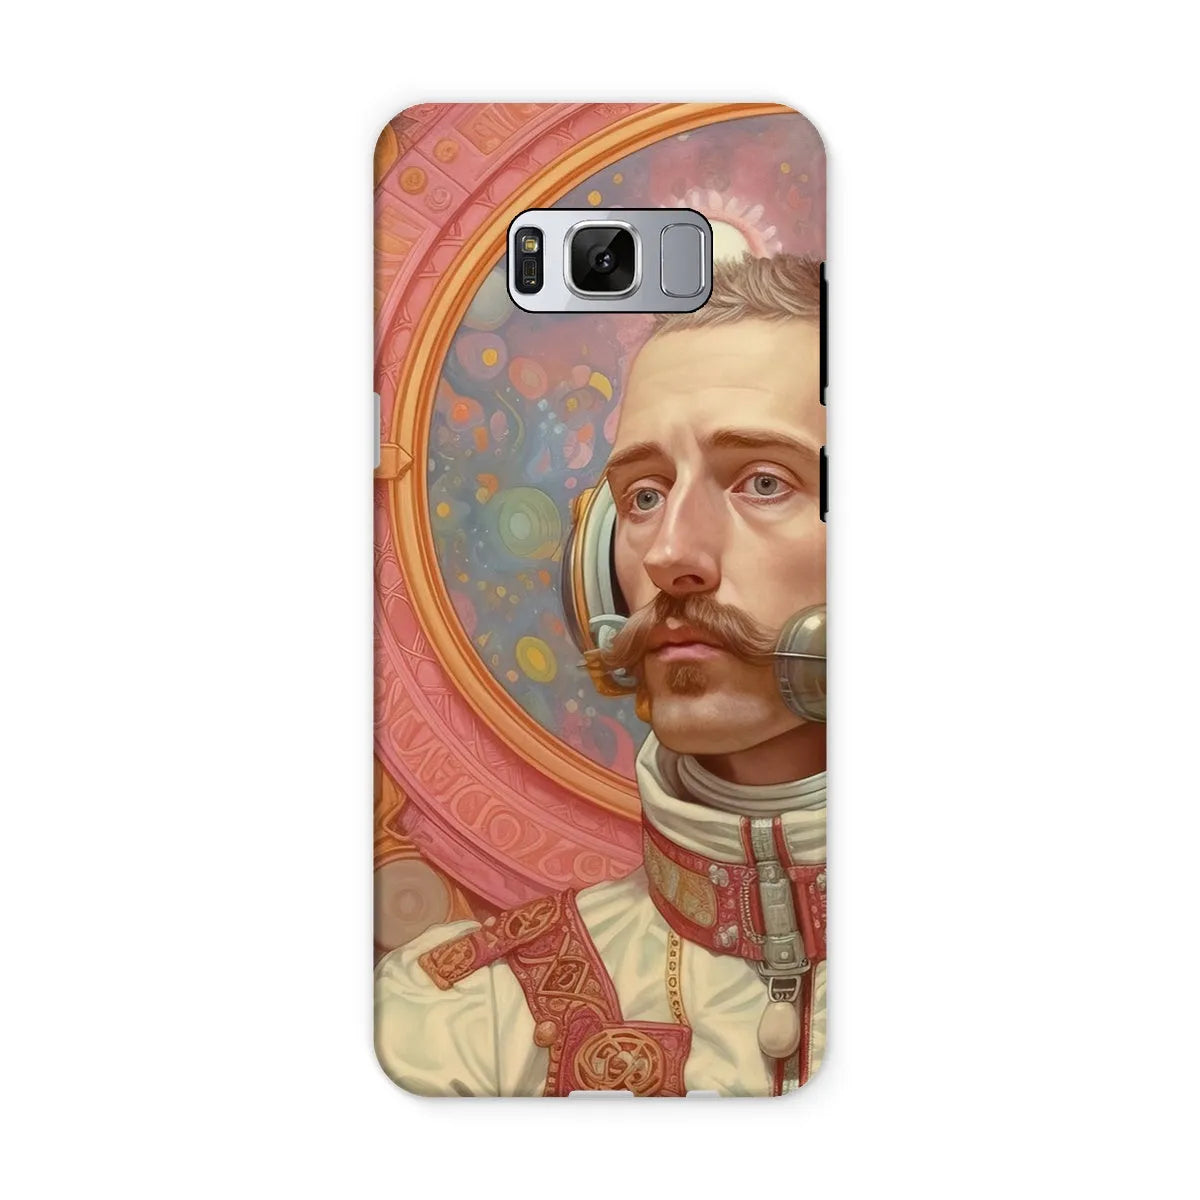 Axel The Gay Astronaut - Gay Aesthetic Art Phone Case - Samsung Galaxy S8 / Matte - Mobile Phone Cases - Aesthetic Art